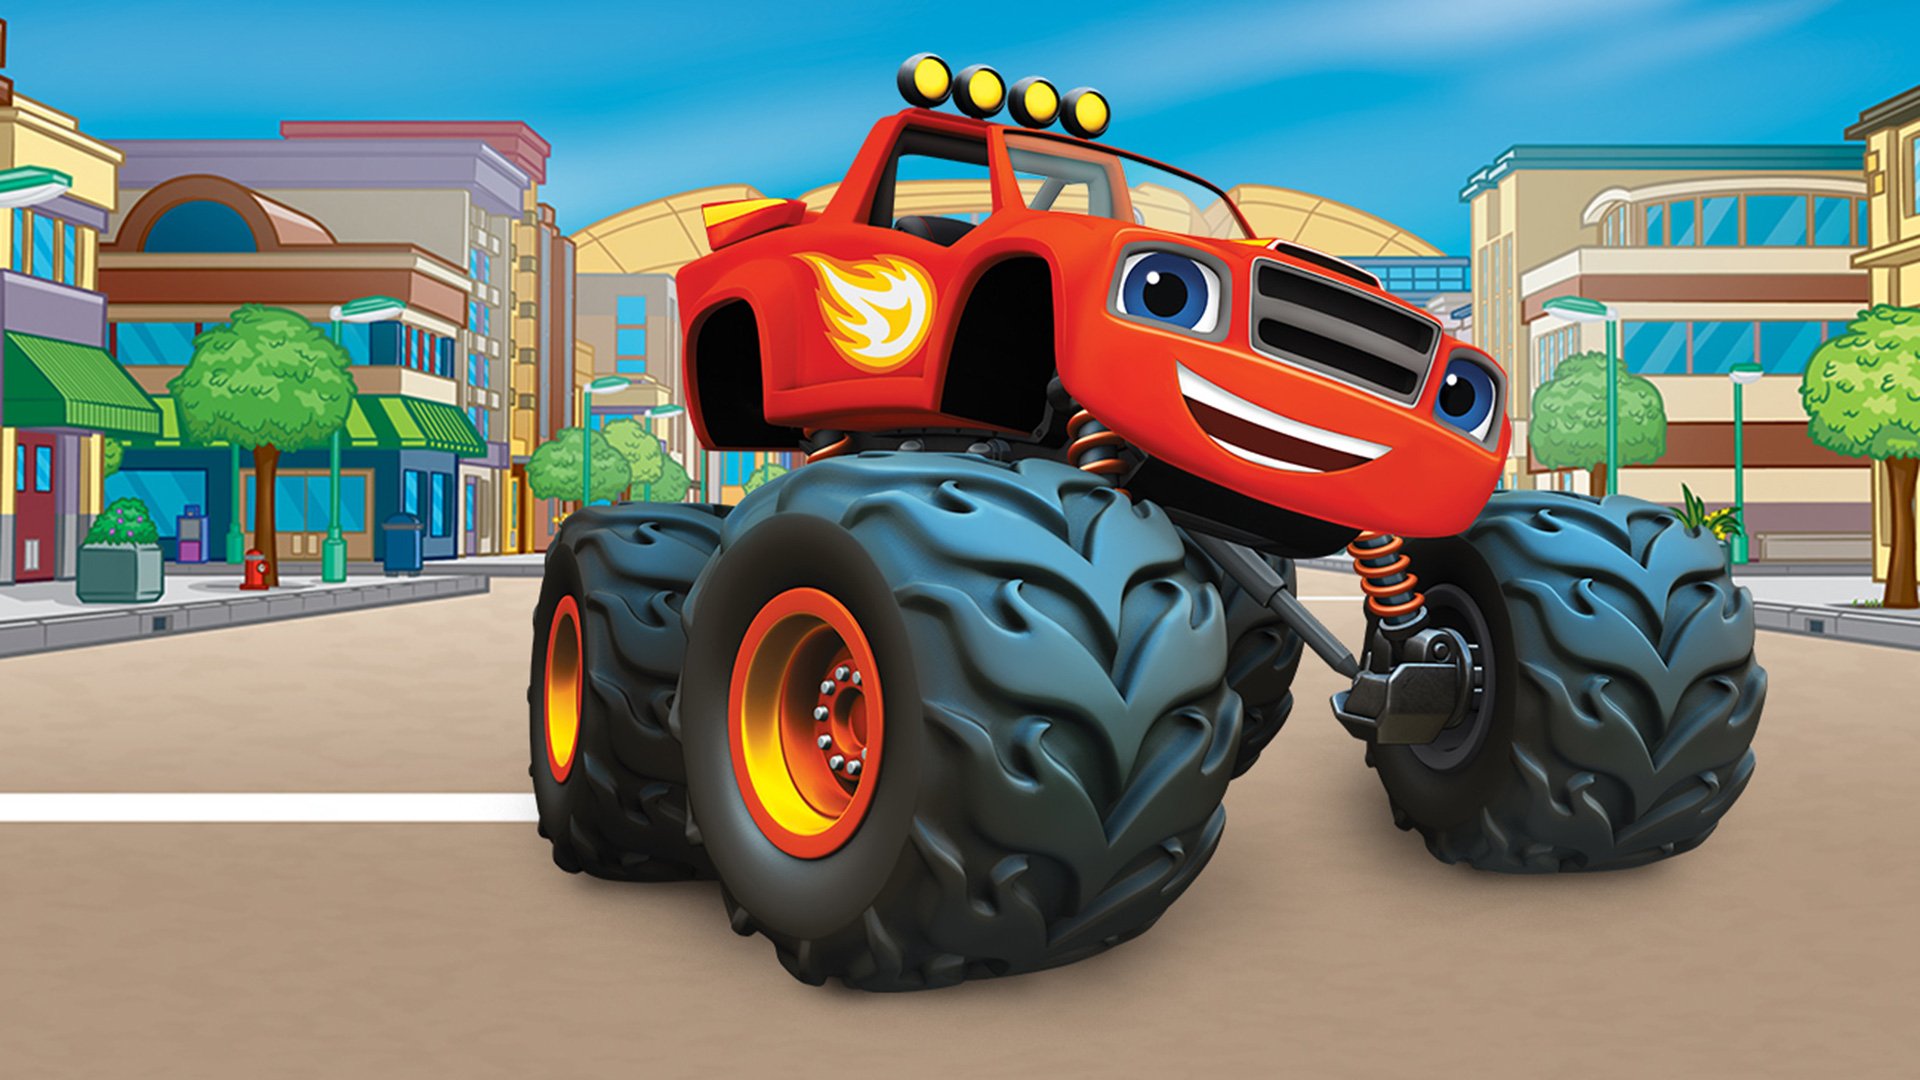 Blaze and the Monster Machines | Season 1 Episode 10 